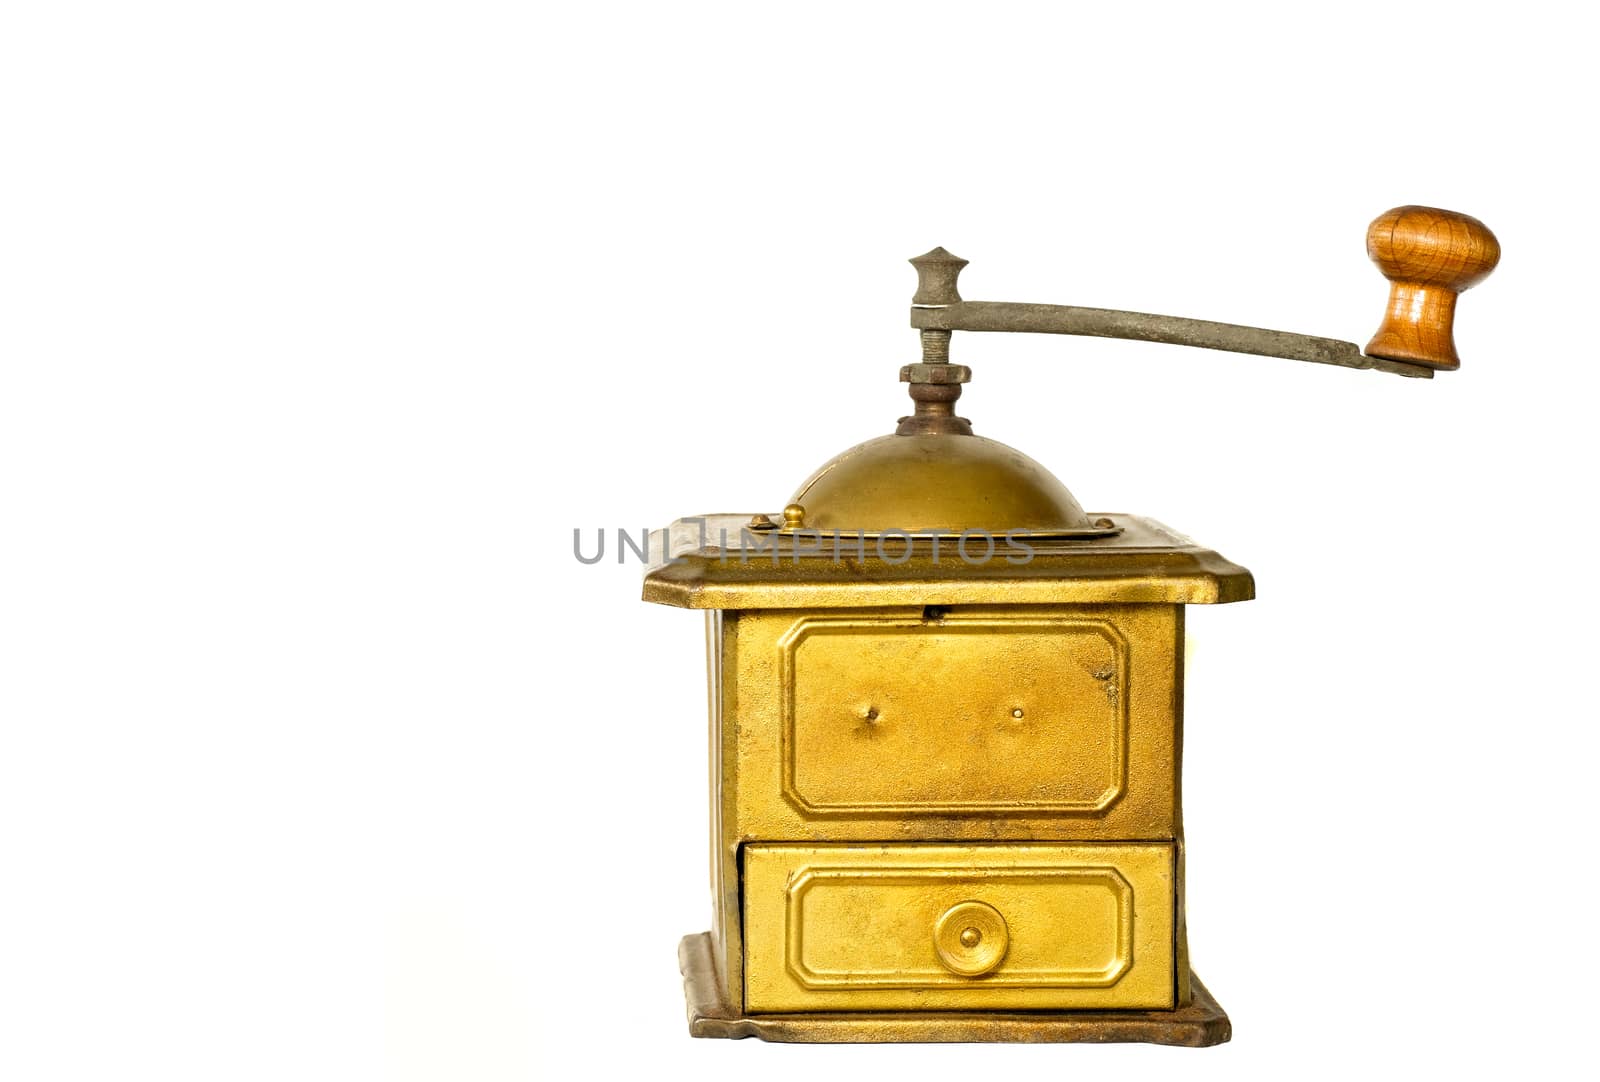 a vintage coffee grinder made of bronze color metal, isolated on white background